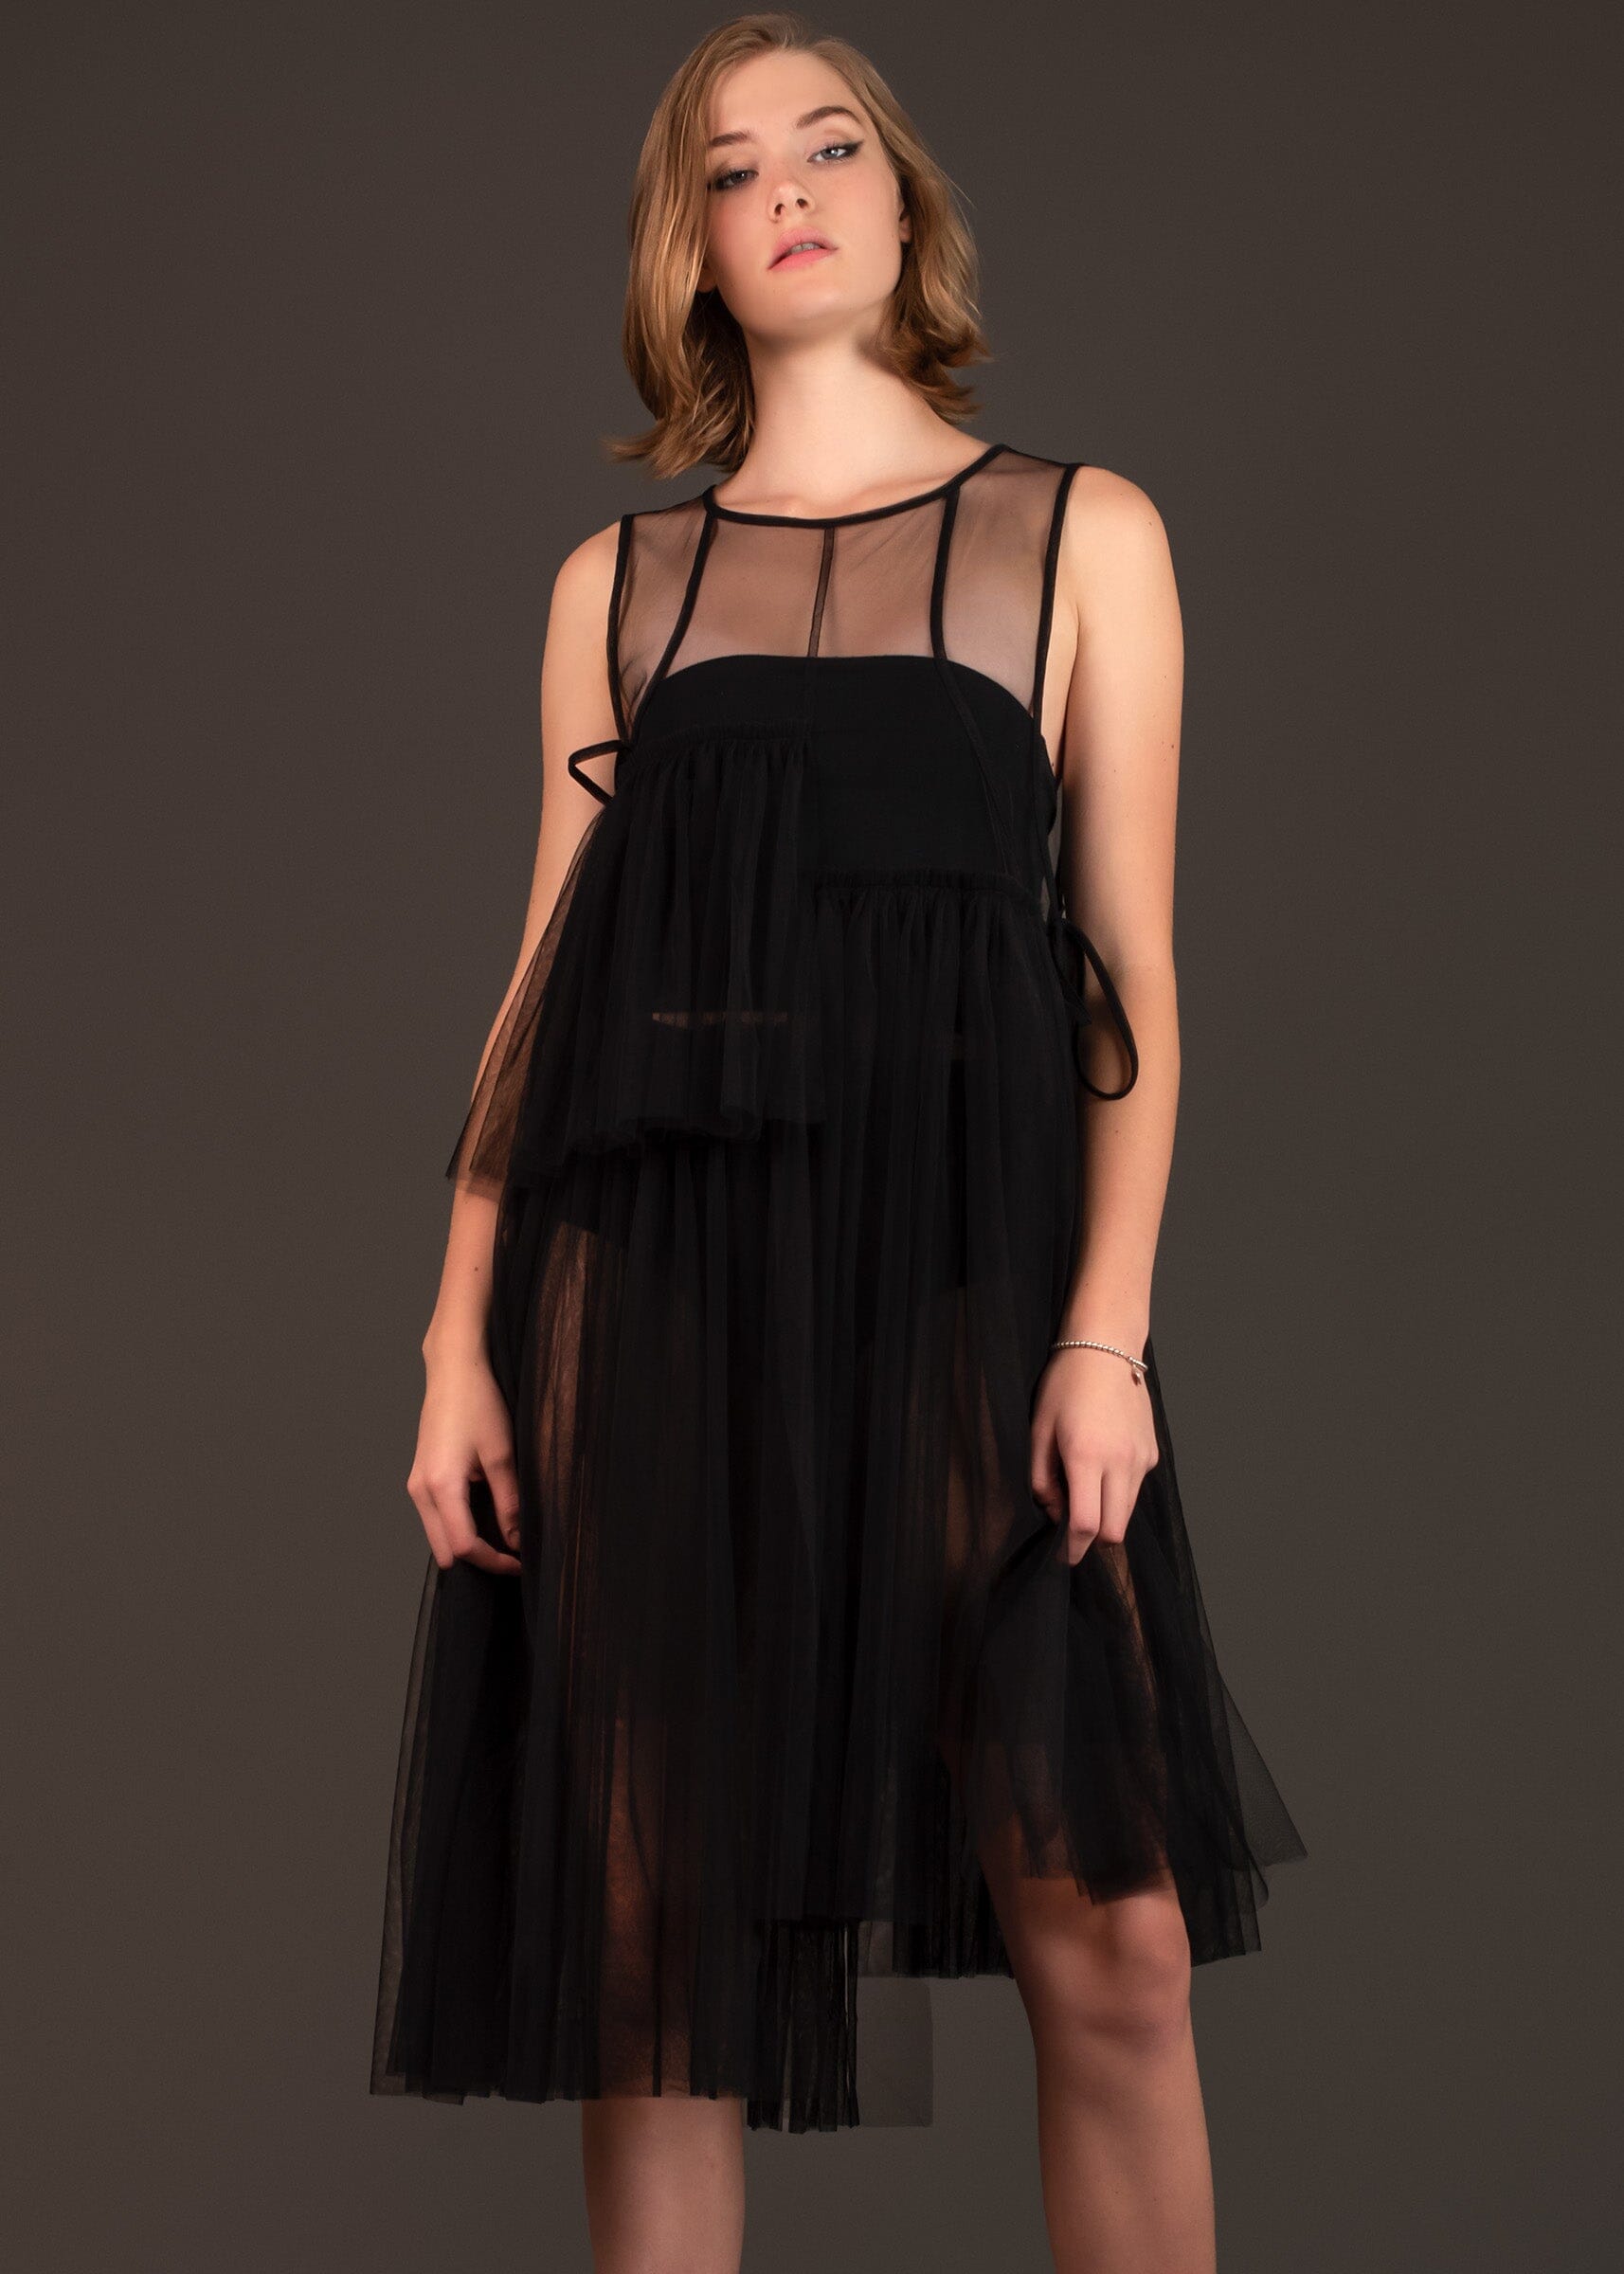 Layered Tulle Tank Overlay Dresses Kate Hewko 